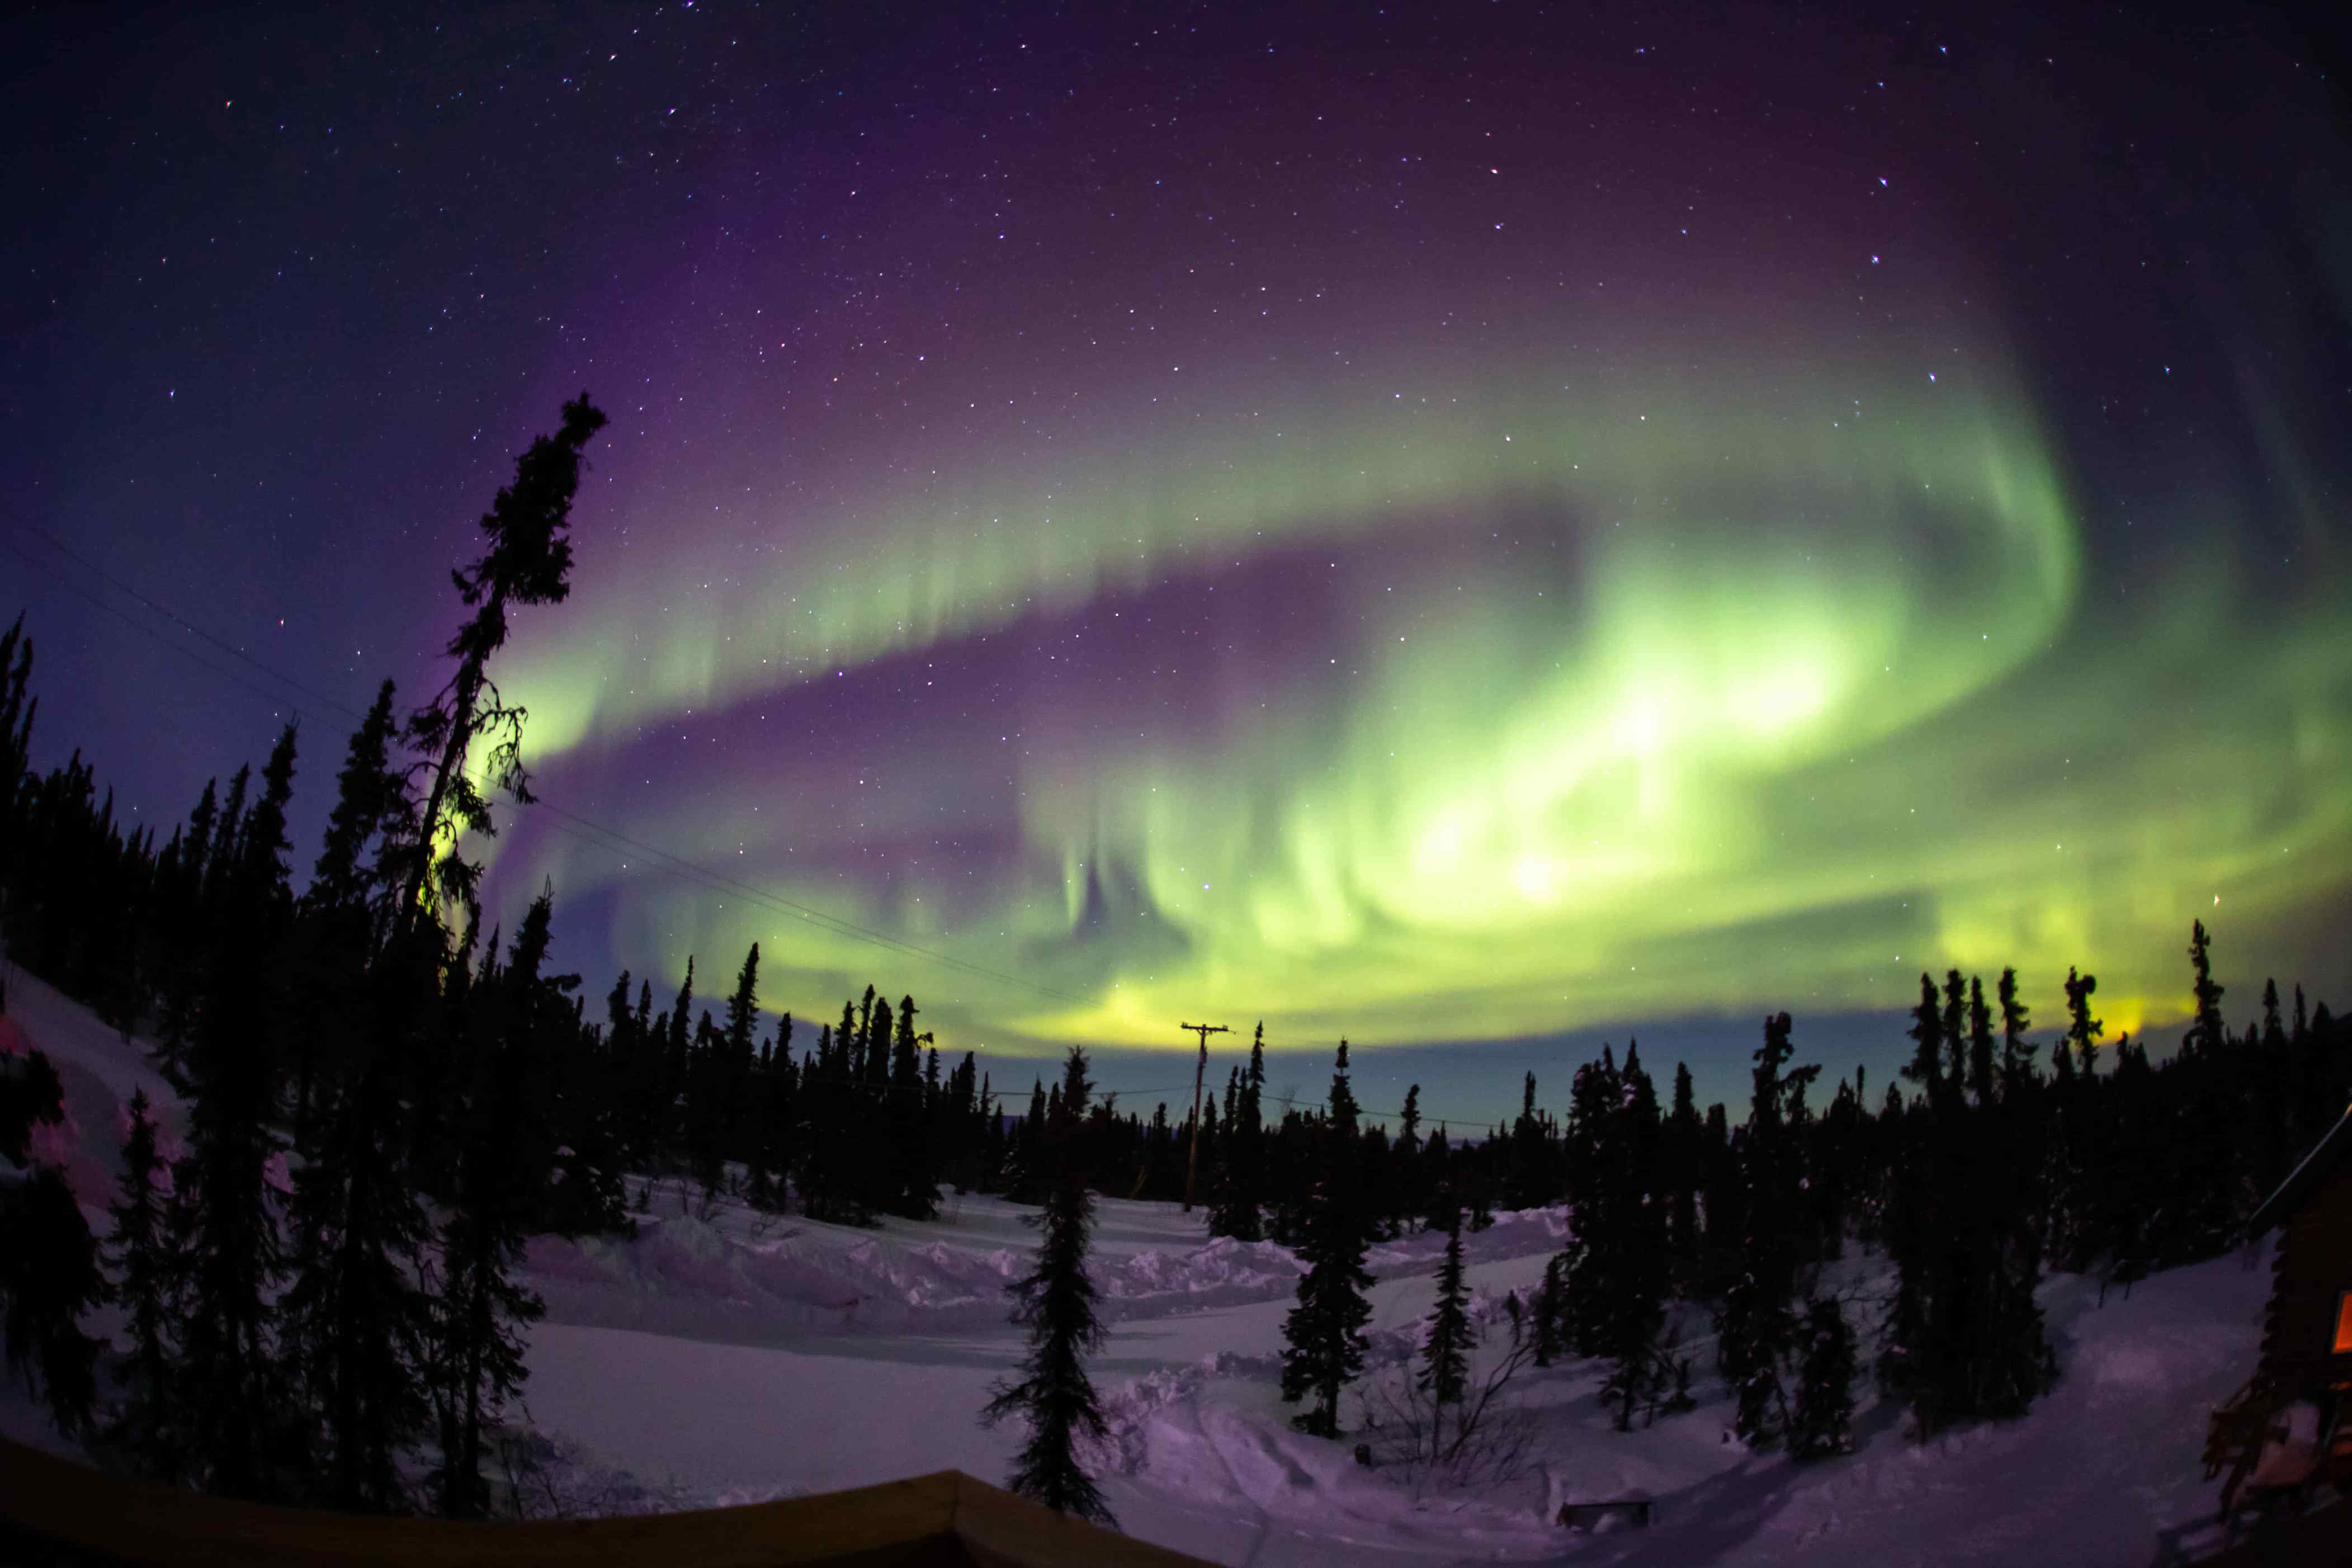 <p>The United States is probably not the first place that comes to mind when trying to figure out where to go to see the northern lights, but maybe it should be! Although sightings are possible in some midwestern states, <a rel="noopener" href="https://a-z-animals.com/blog/discover-how-alaskans-deal-with-40-days-of-night-and-sunlight/?utm_campaign=feed&utm_source=rss_feed&utm_medium=in_content&utm_content=1360267">Alaska</a> is the only place in the United States that is truly renowned for excellent aurora borealis viewing opportunities. More specifically, Fairbanks has been singled out as one of the best places to see the northern lights in 2024! </p><p>Sharks, lions, alligators, and more! Don’t miss today’s latest and most exciting animal news. <strong><a href="https://www.msn.com/en-us/channel/source/AZ%20Animals%20US/sr-vid-7etr9q8xun6k6508c3nufaum0de3dqktiq6h27ddeagnfug30wka">Click here to access the A-Z Animals profile page</a> and be sure to hit the <em>Follow</em> button here or at the top of this article!</strong></p> <p>Have feedback? Add a comment below!</p>